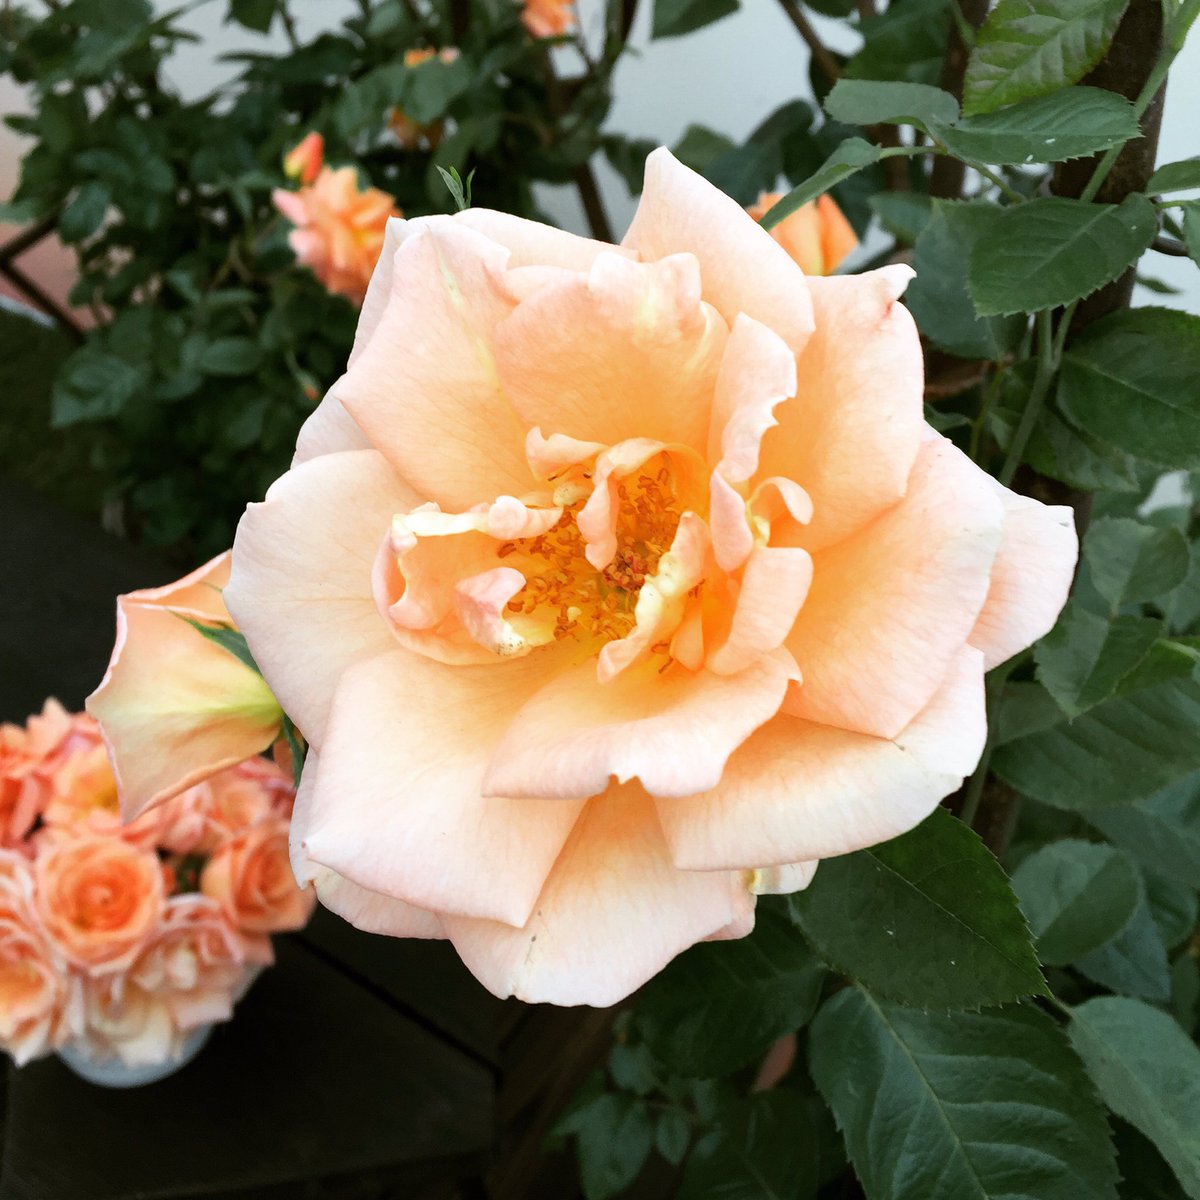 #RoseOfTheYear 'Scent from Heaven' presented yesterday at #RhsHampton @The_RHS